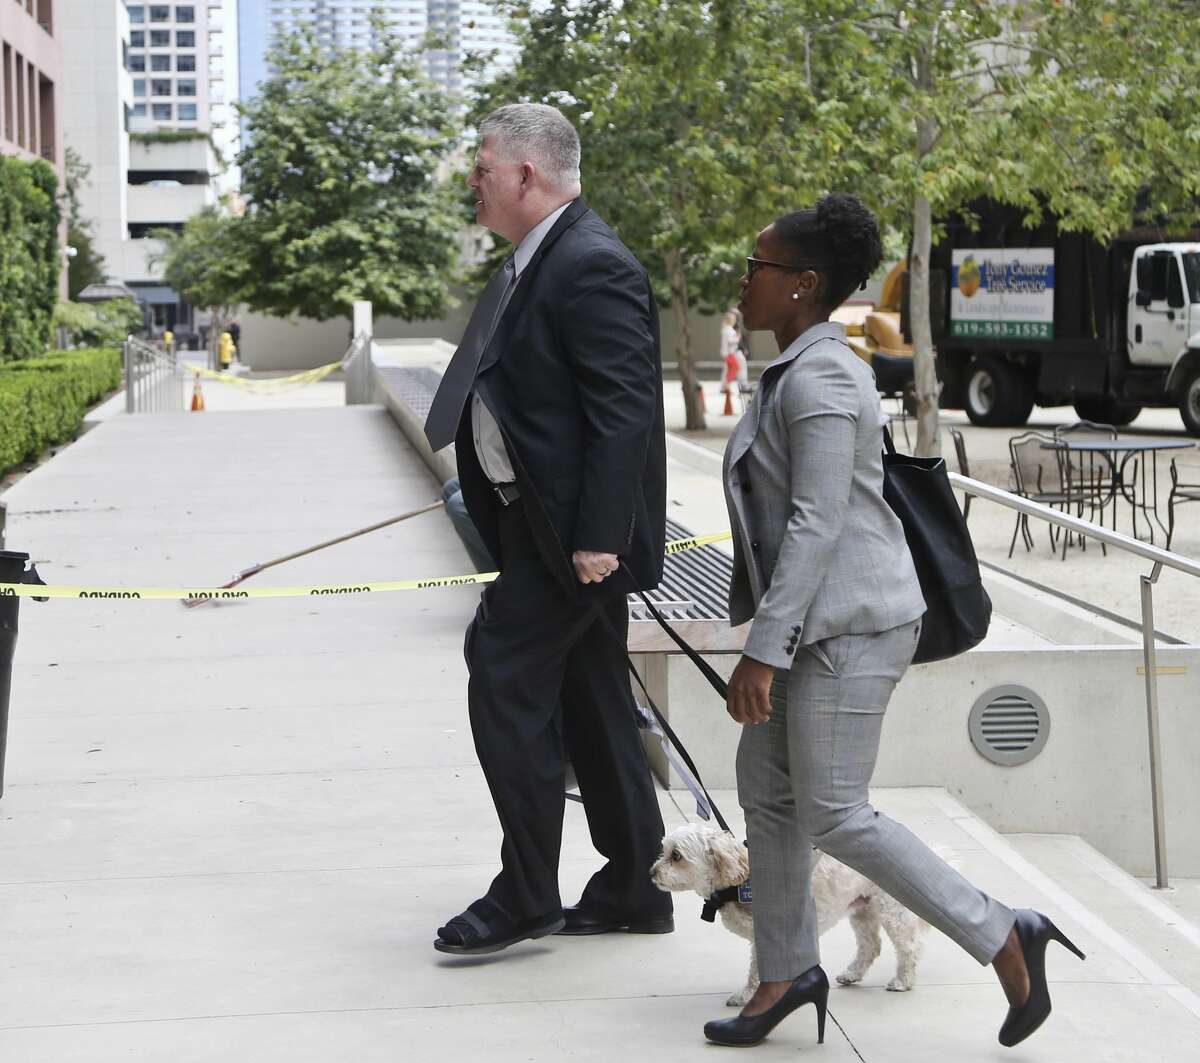 Rear Adm. Robert Gilbeau enters the federal courthouse in San Diego on Thursday, June 9, 2016. Gilbeau pleaded guilty Thursday to lying to federal authorities investigating a $34 million fraud scheme involving a Malaysian contractor known as "Fat Leonard." (AP Photo/Lenny Ignelzi)